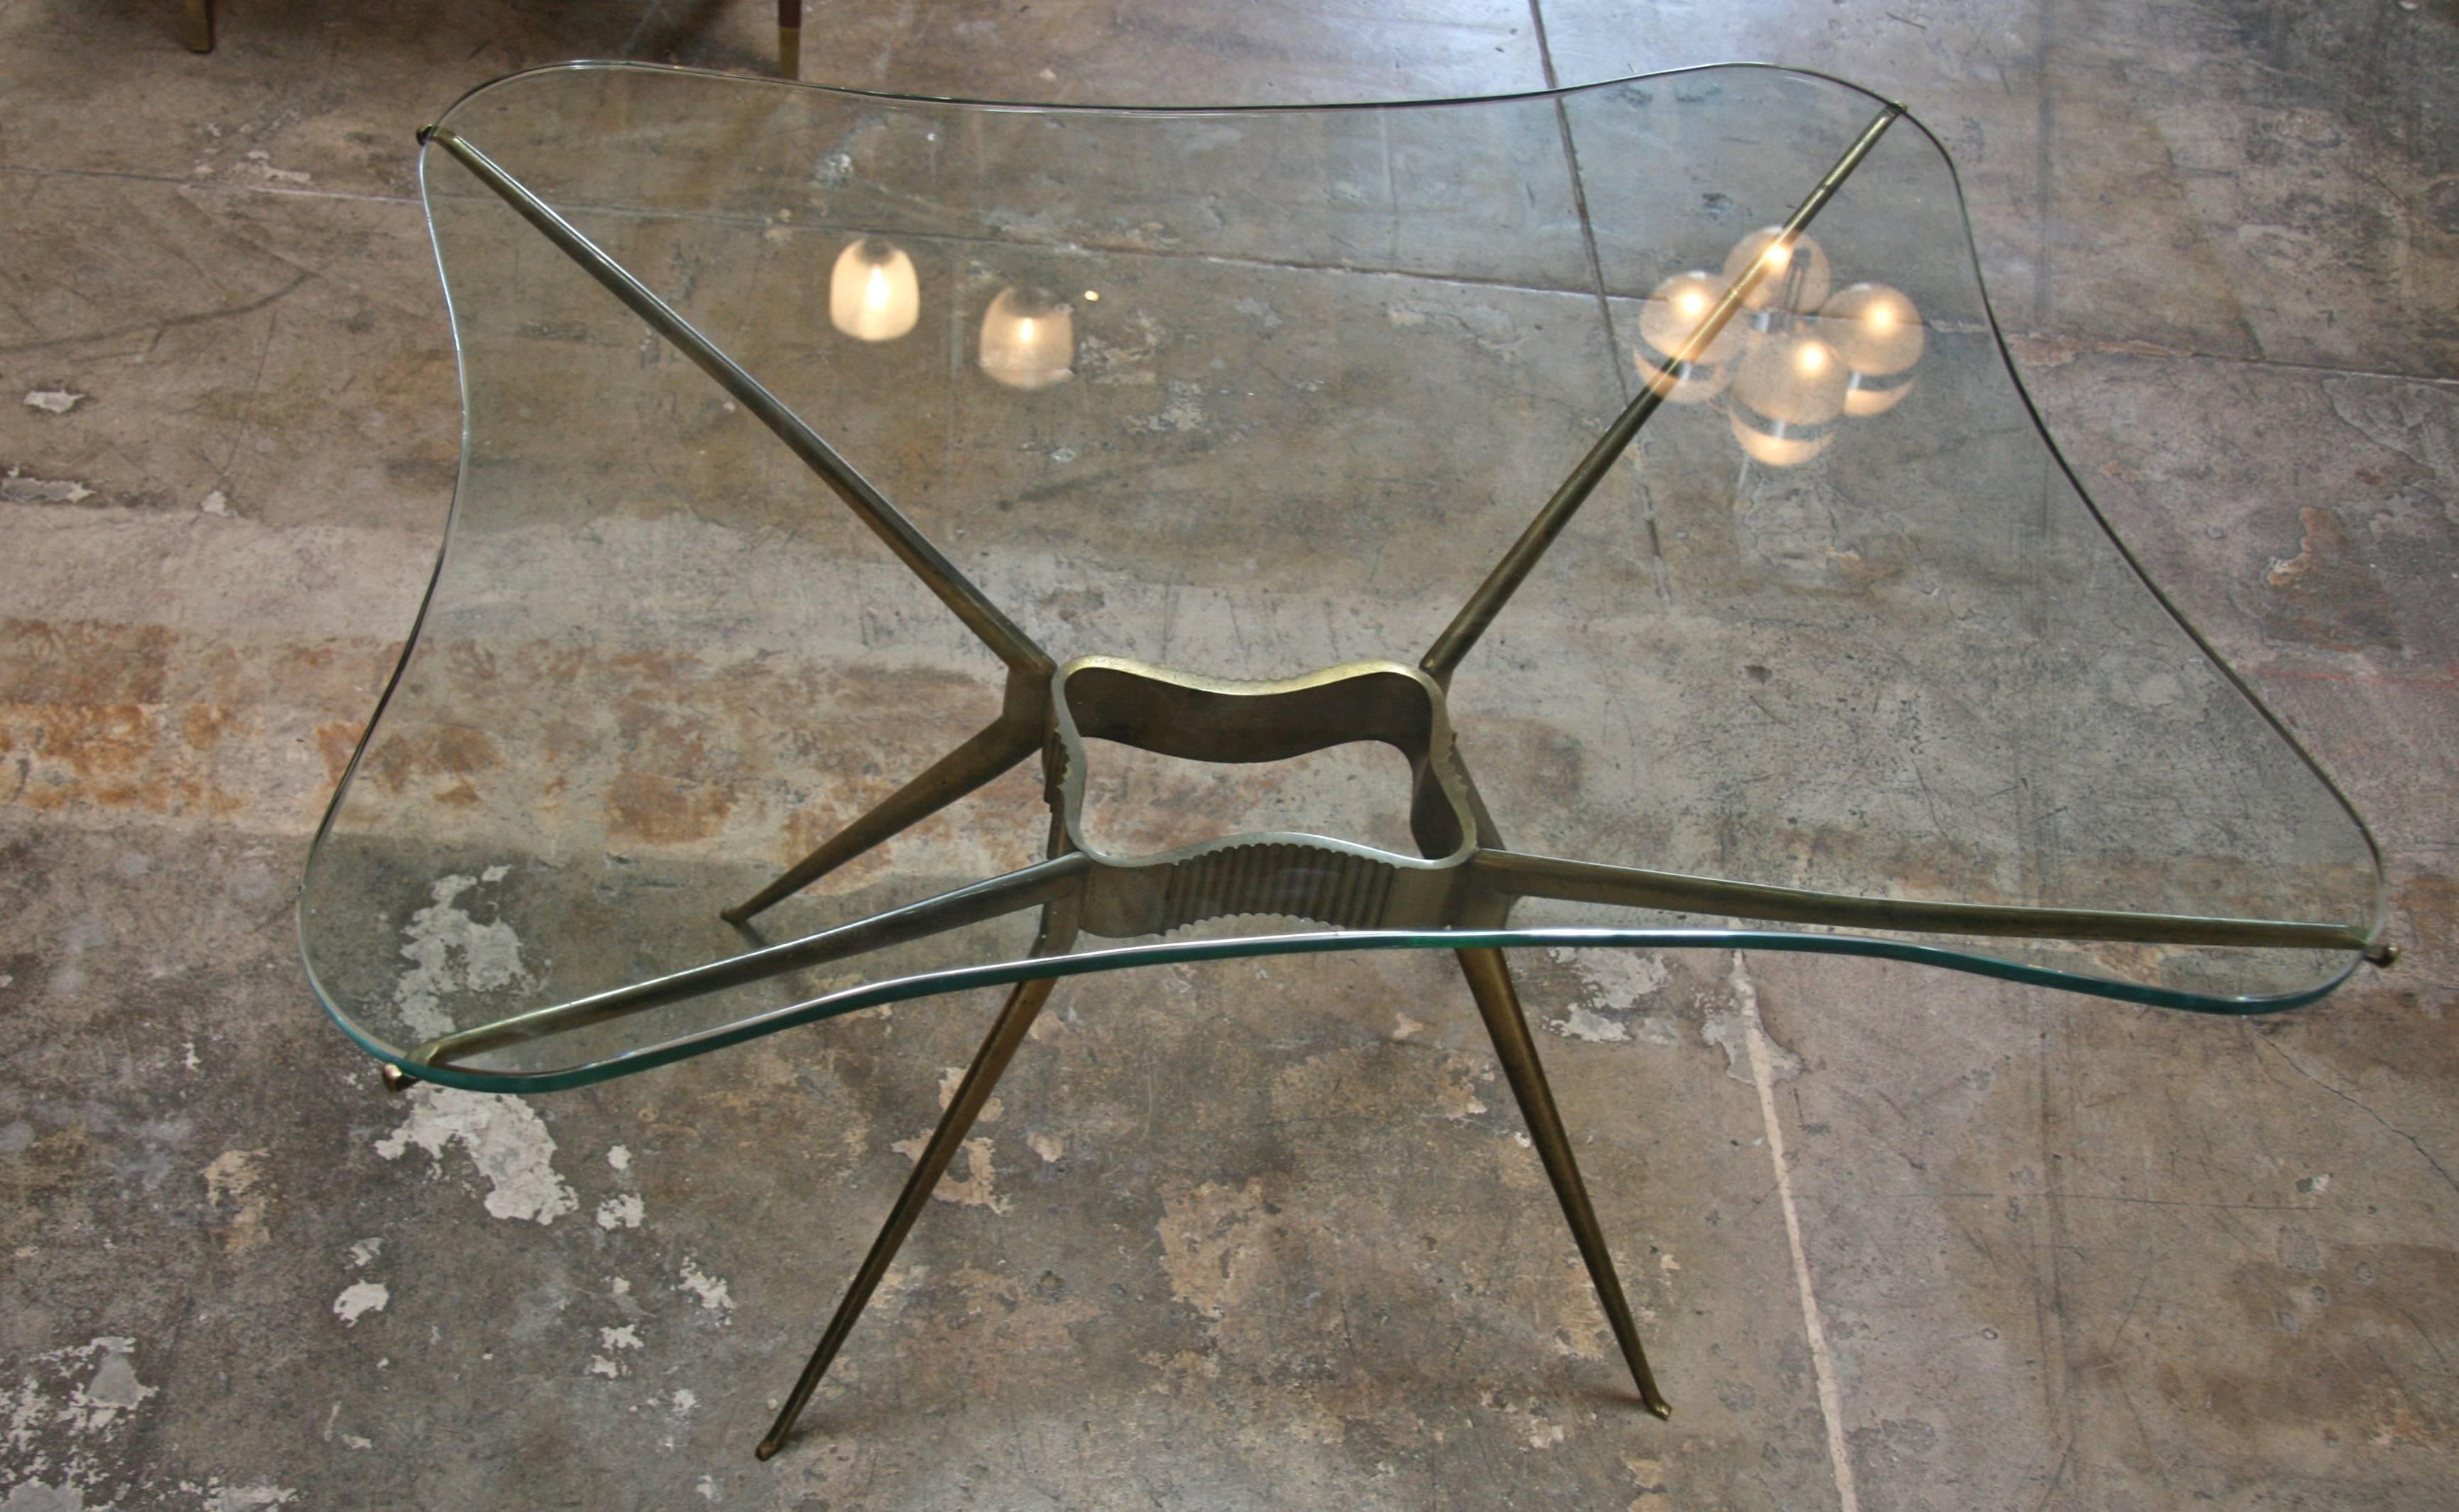 Italian 1950s brass cocktail table. This delicate design stands the test of time.